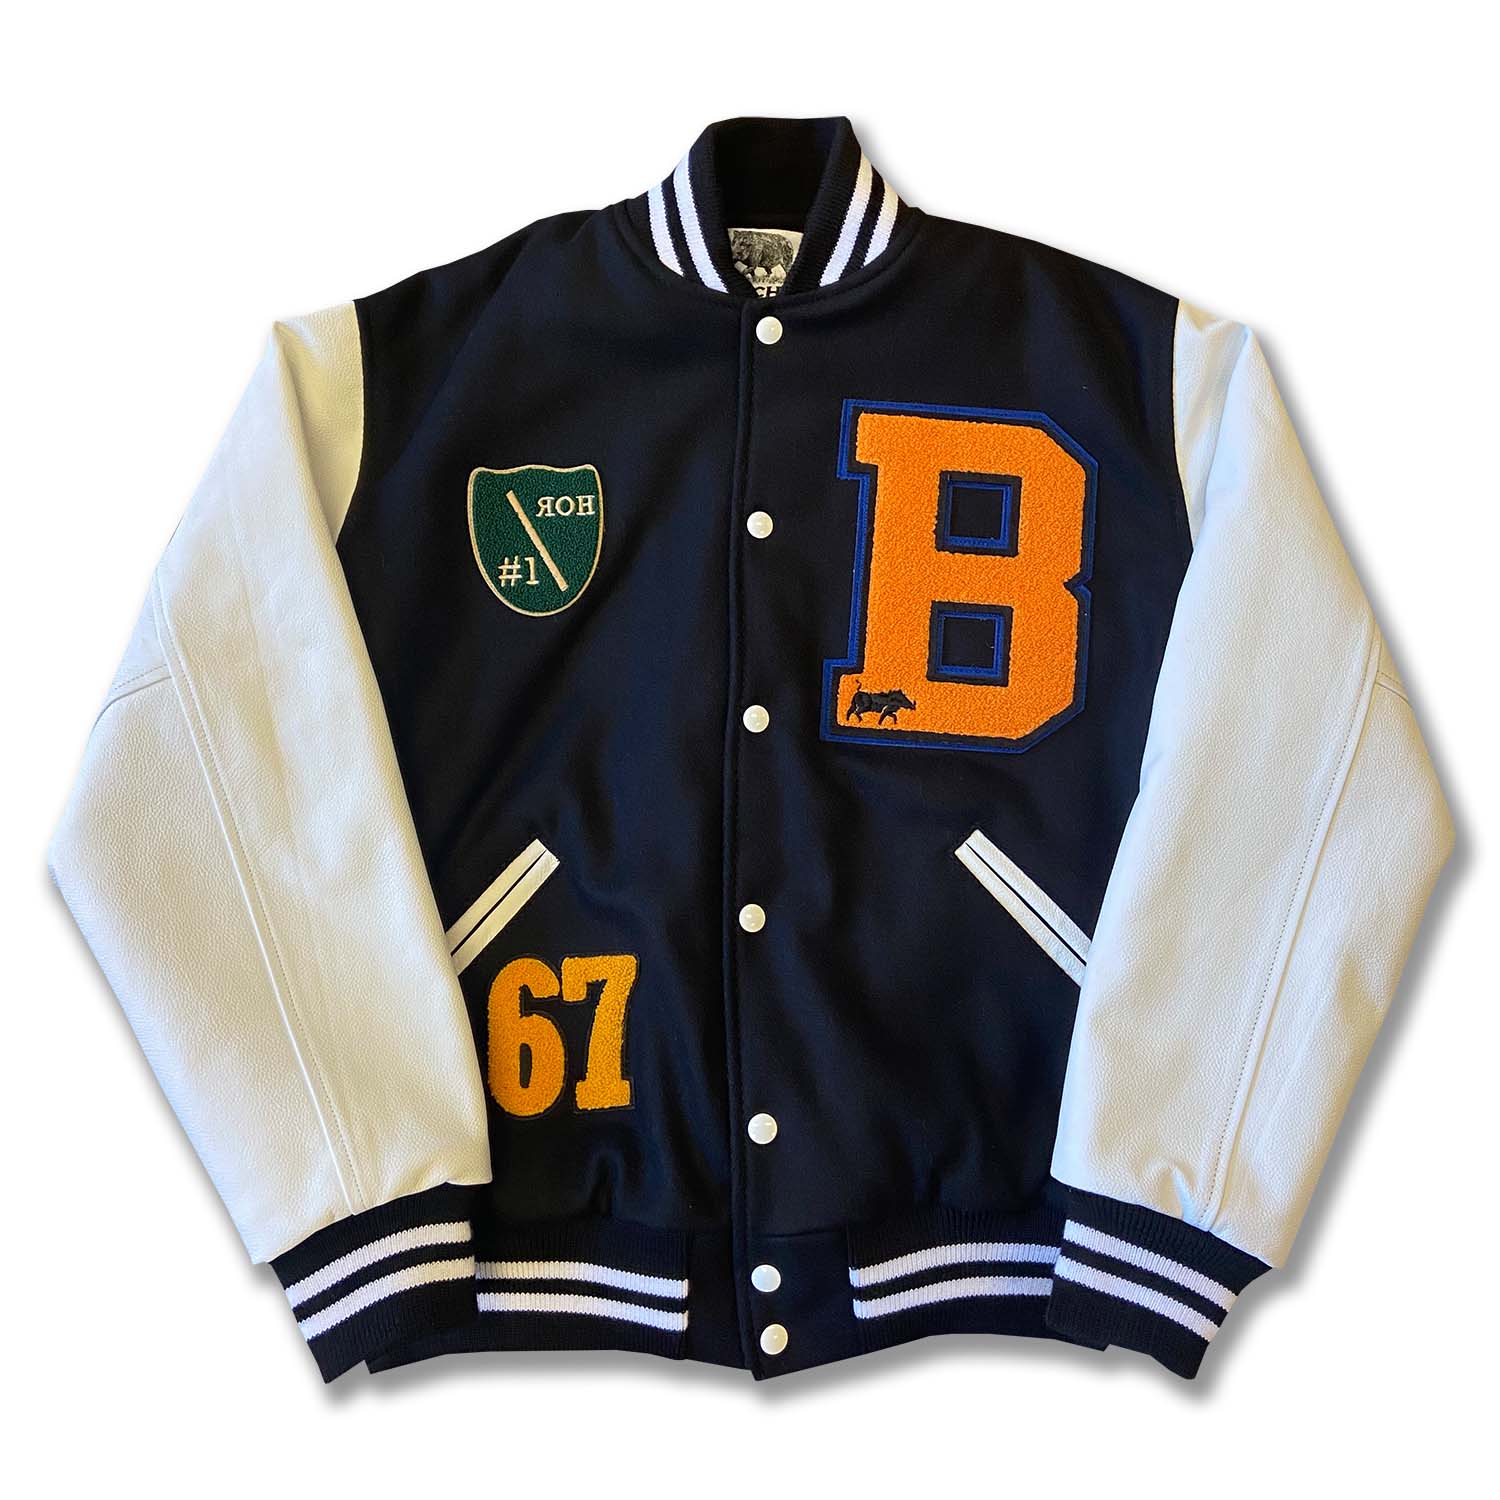 Letterman Jacket History: Outstanding Patches from the Past